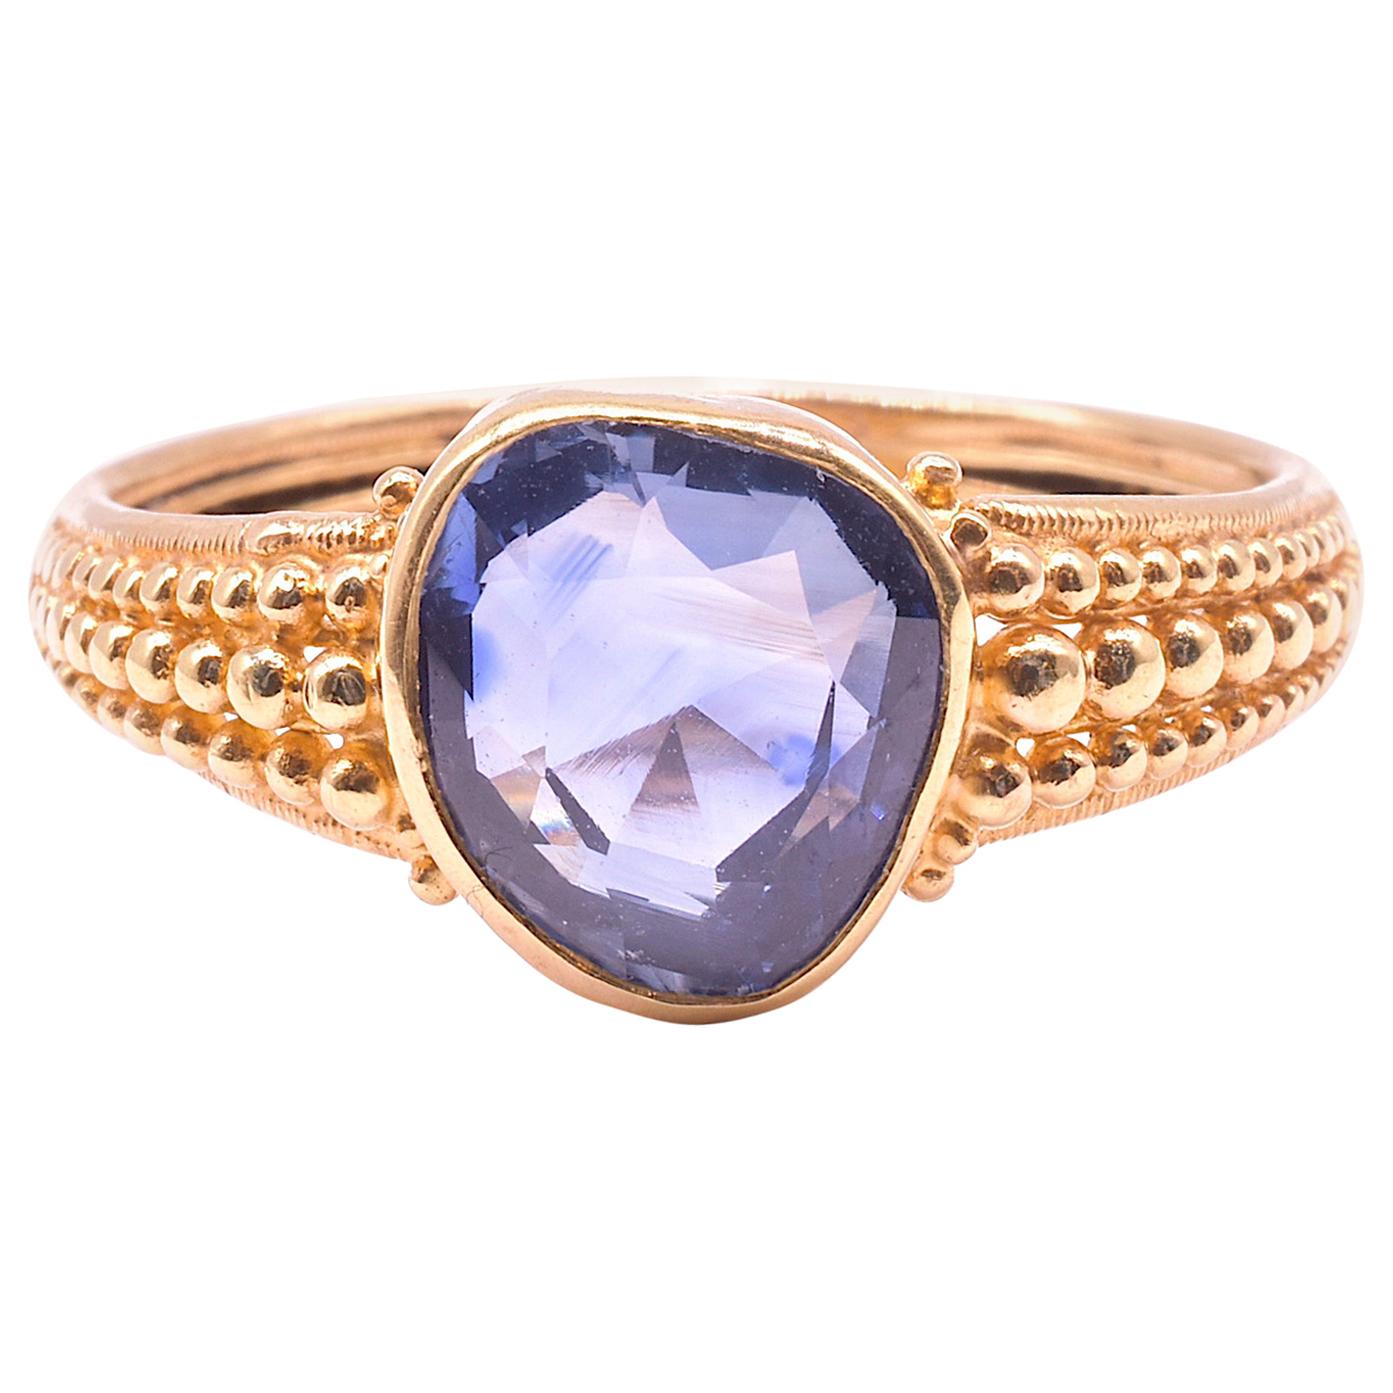 C.1830 18K Heart Shaped Natural Sapphire Ring with Gold Beadwork